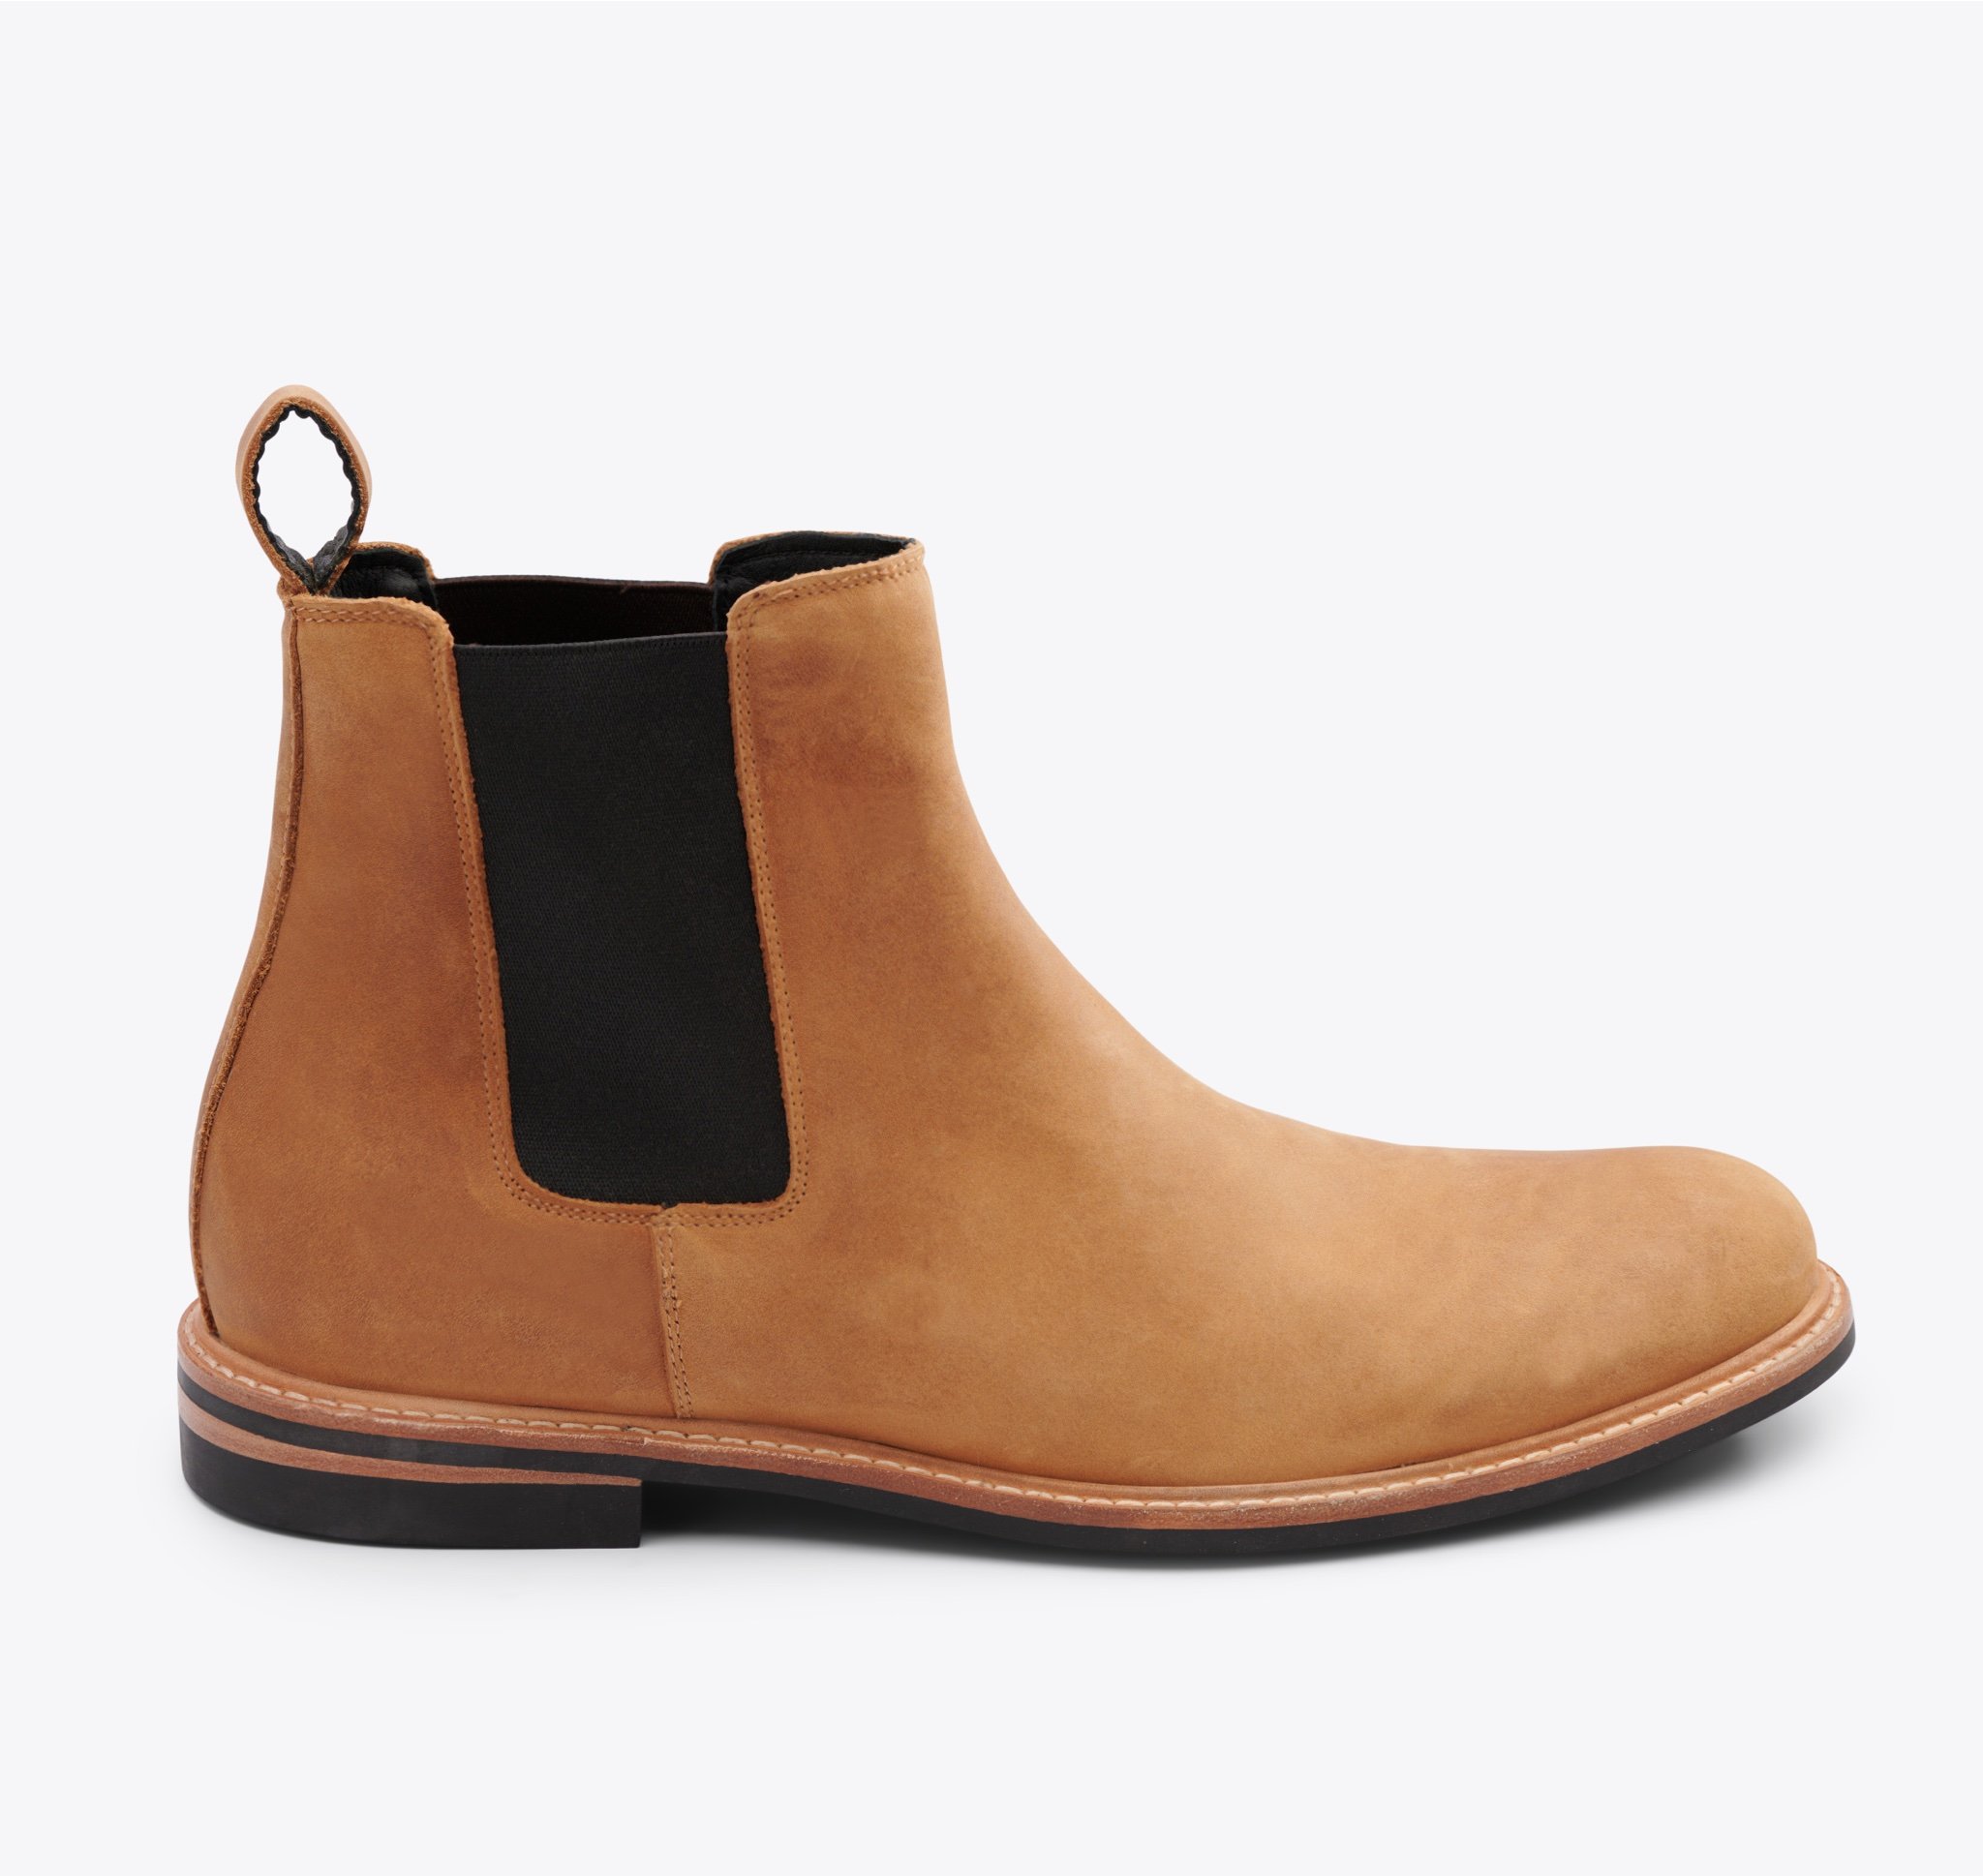 Nisolo All-Weather Chelsea Boot Tobacco - Every Nisolo product is built on the foundation of comfort, function, and design. 